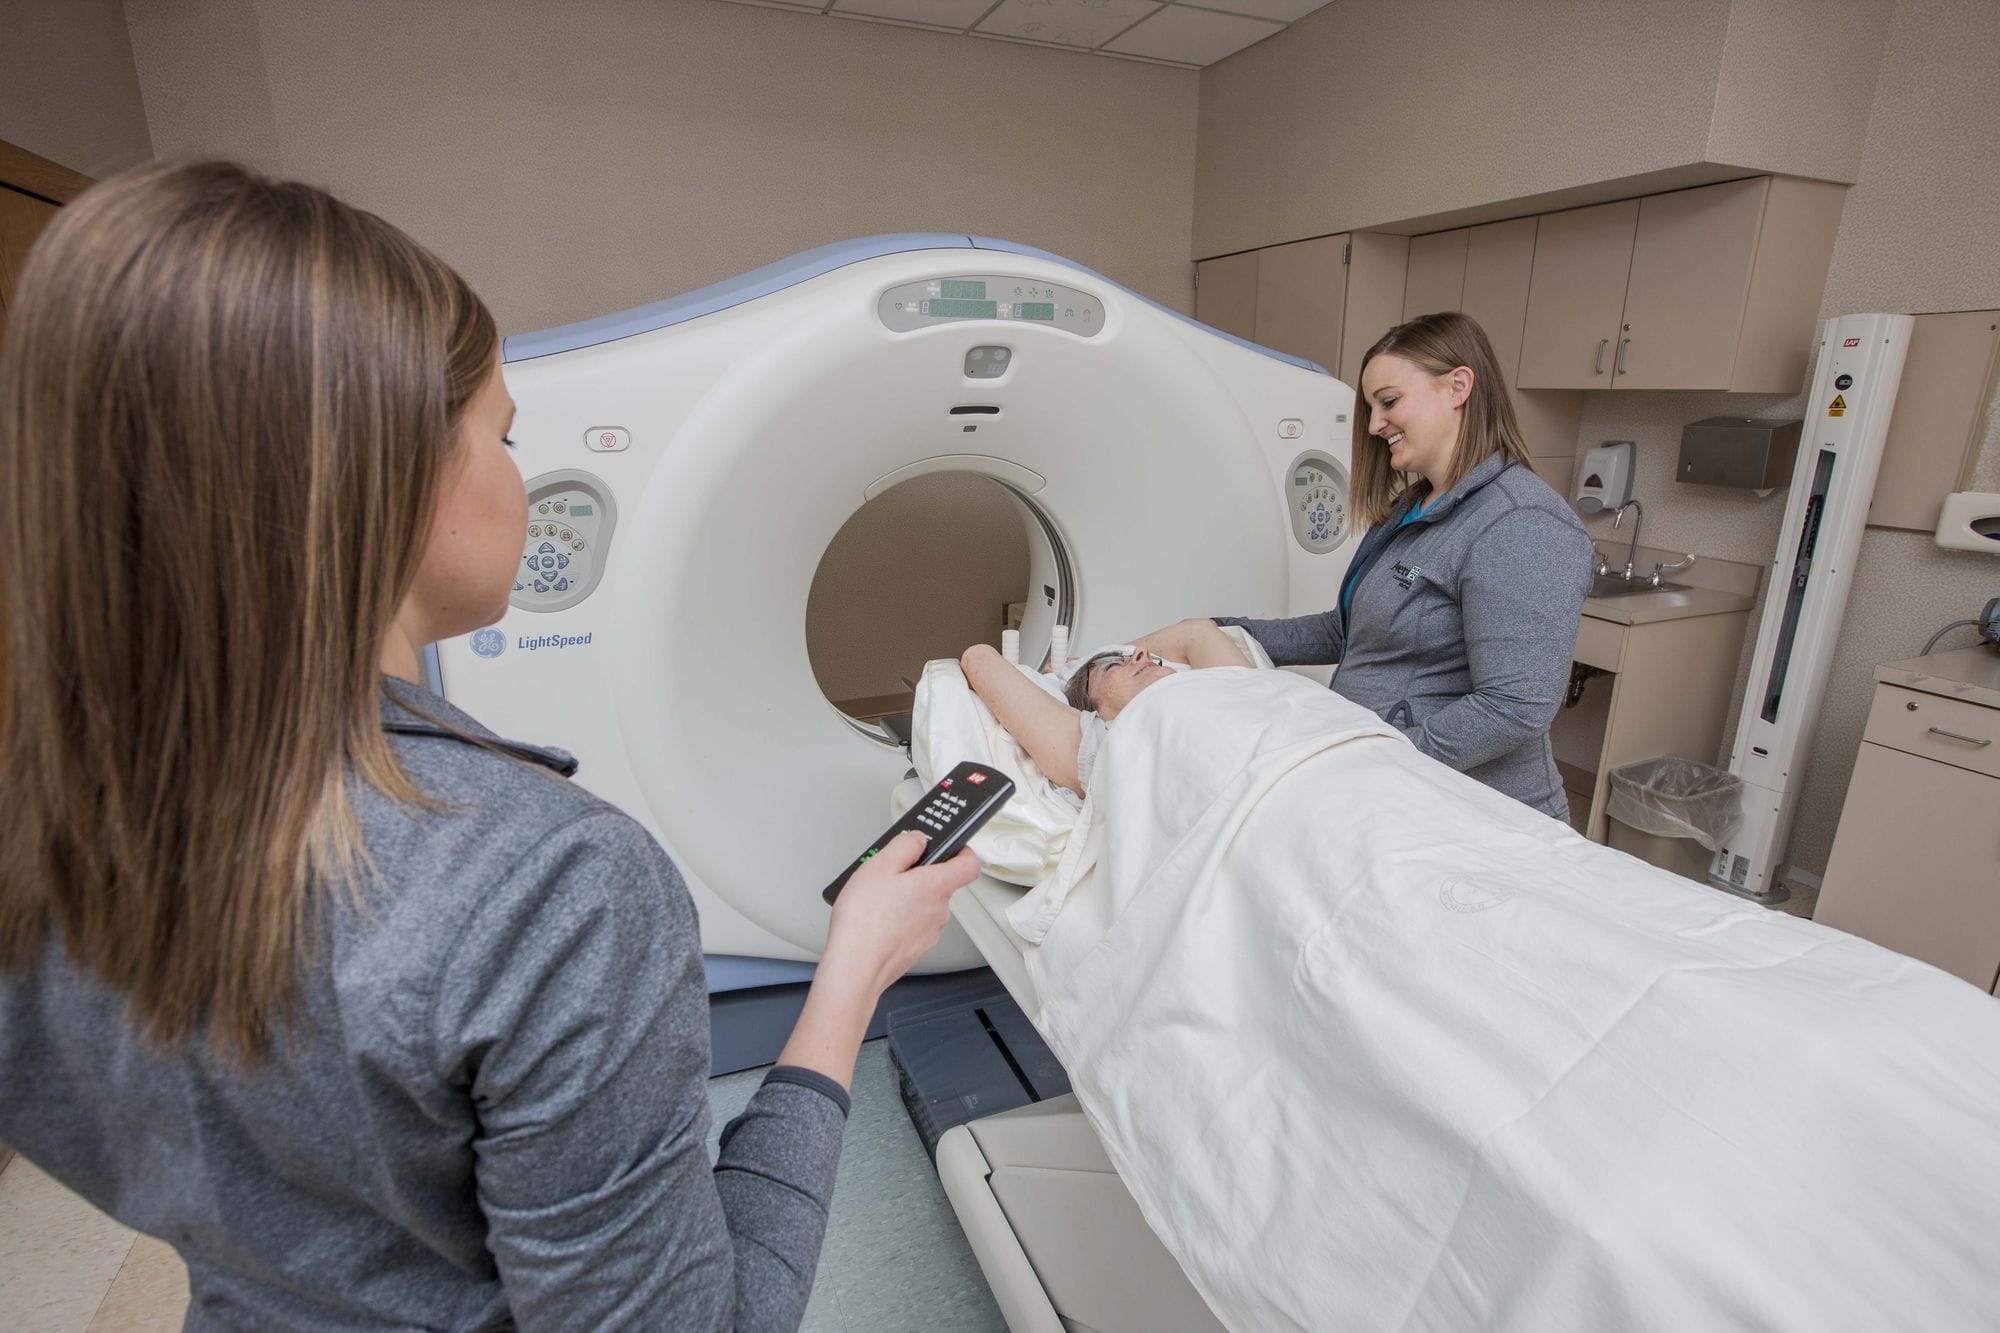 A woman undergoes an MRI treatment as two technicians look on